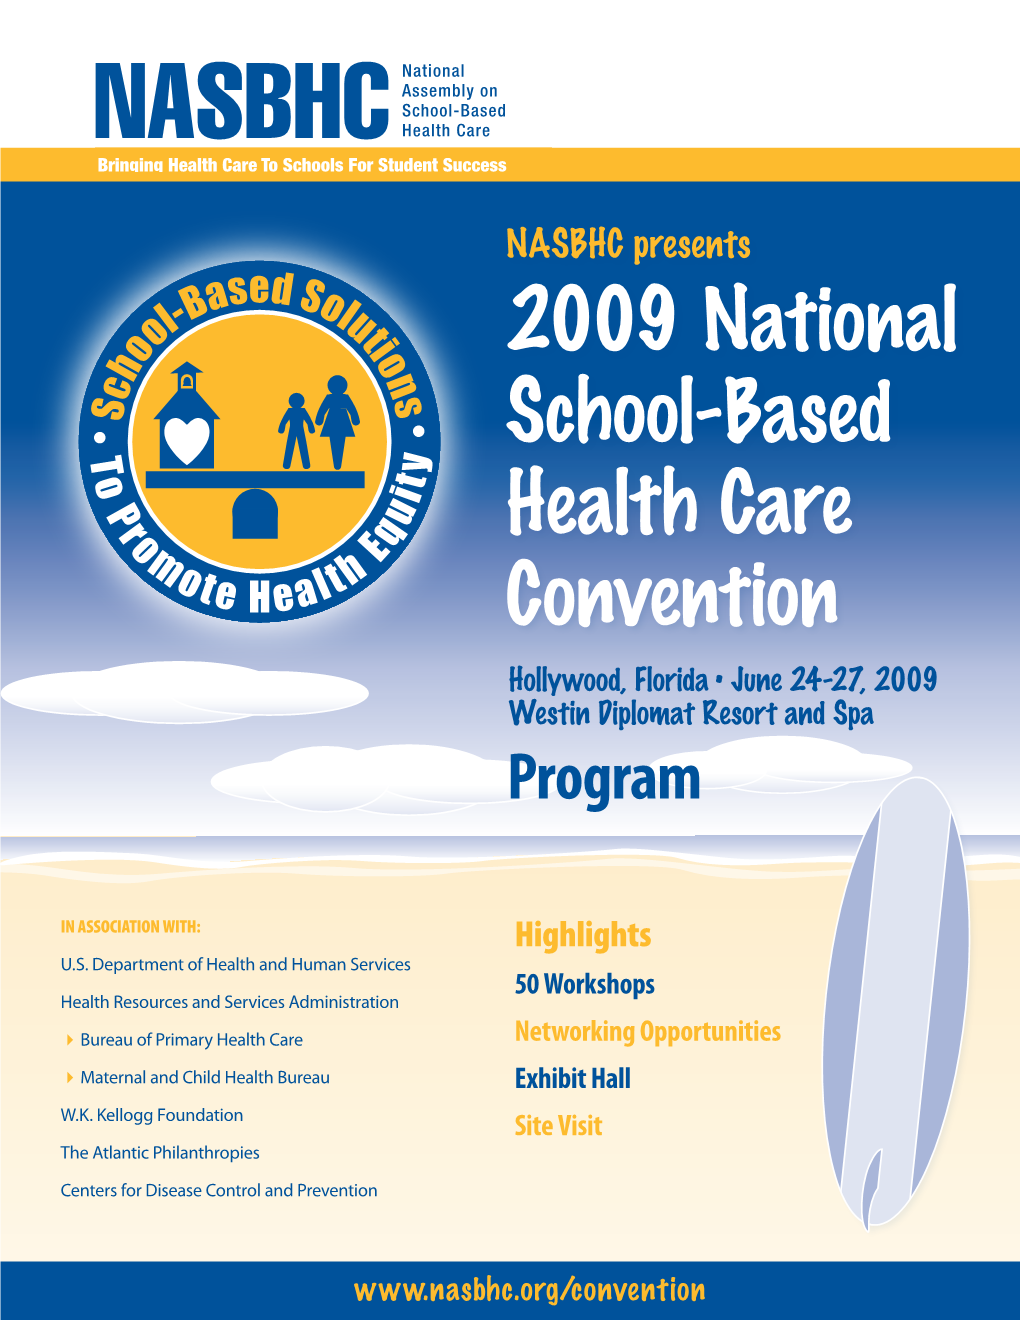 2009 National School-Based Health Care Convention Hollywood, Florida • June 24-27, 2009 Westin Diplomat Resort and Spa Program